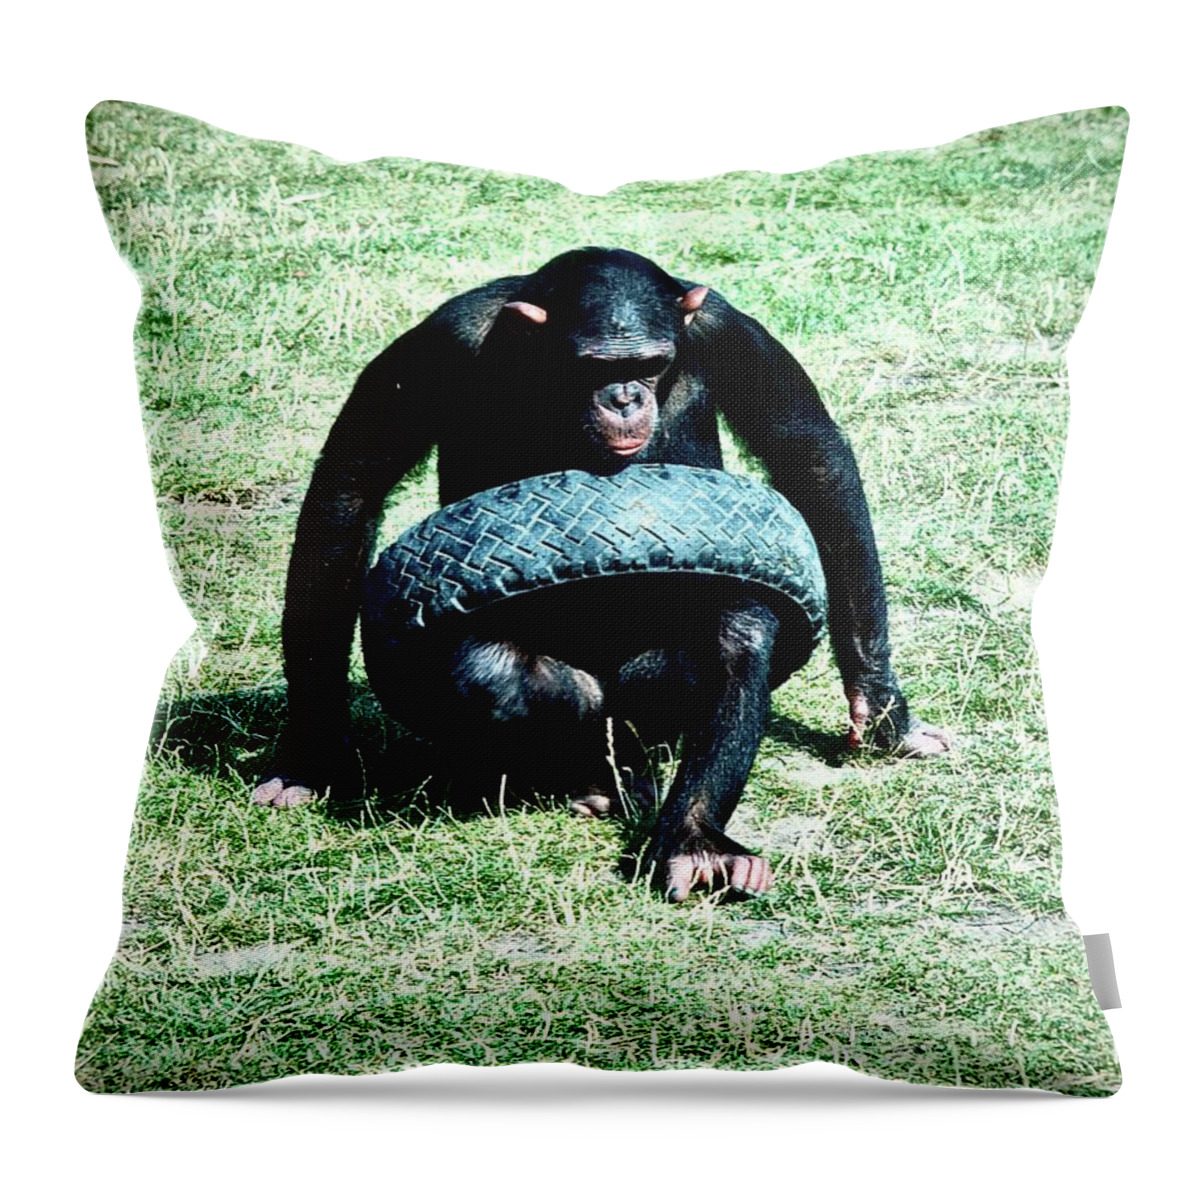 Chimpanzee Throw Pillow featuring the photograph Tyred Chimp by Gordon James